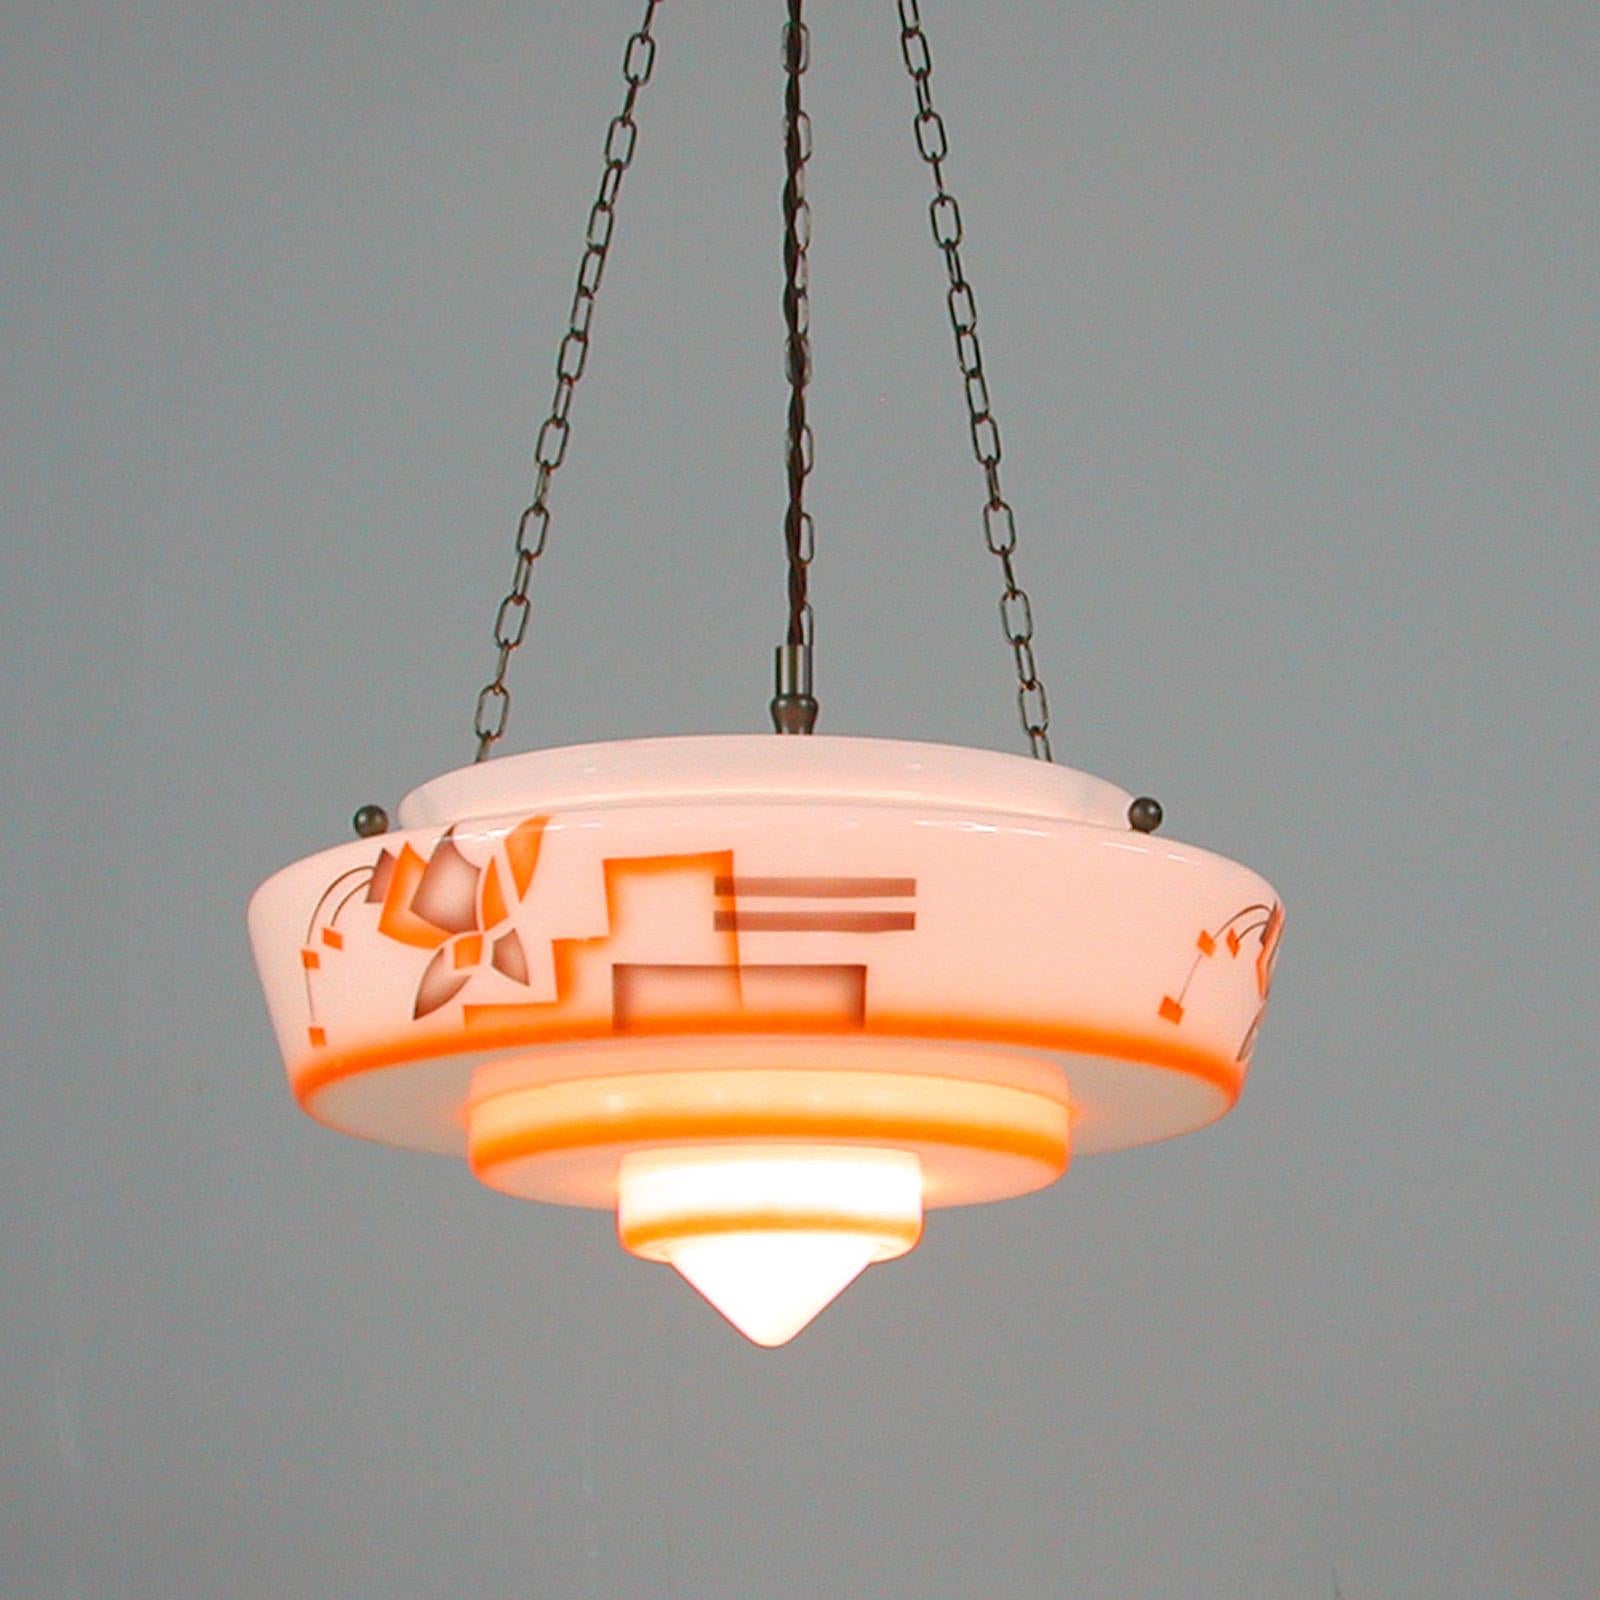 Mid-20th Century German Art Deco Suspension Light, Enameled Glass and Brass, 1930s For Sale